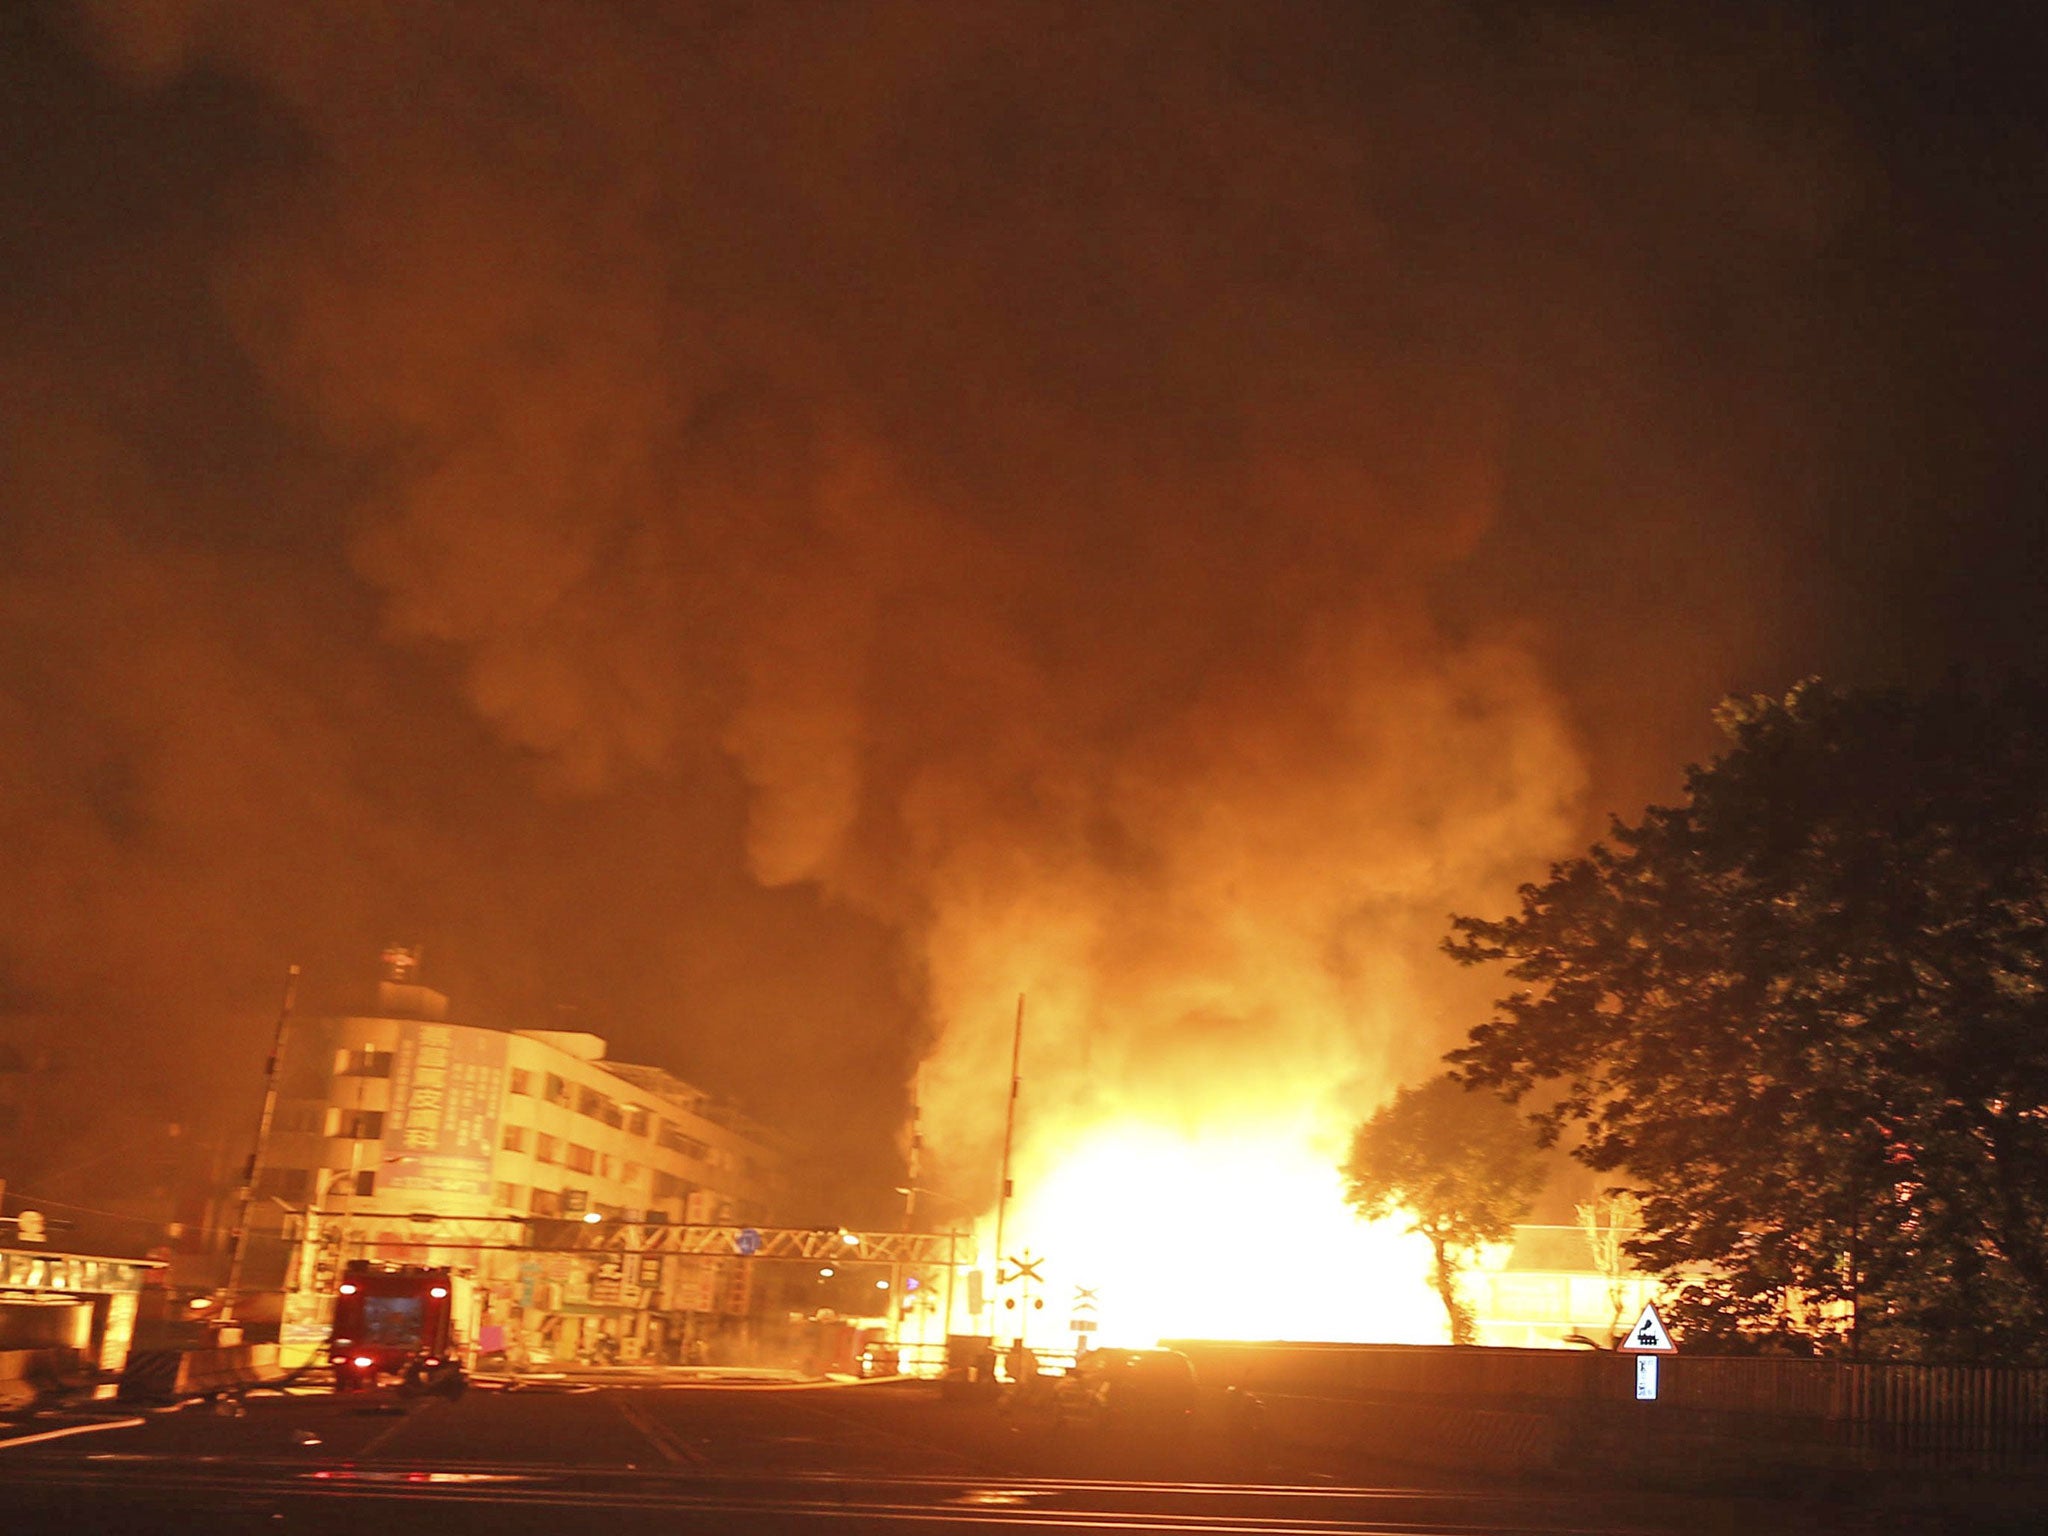 Flames from an explosion from an underground gas leak in the streets of Kaohsiung, Taiwan